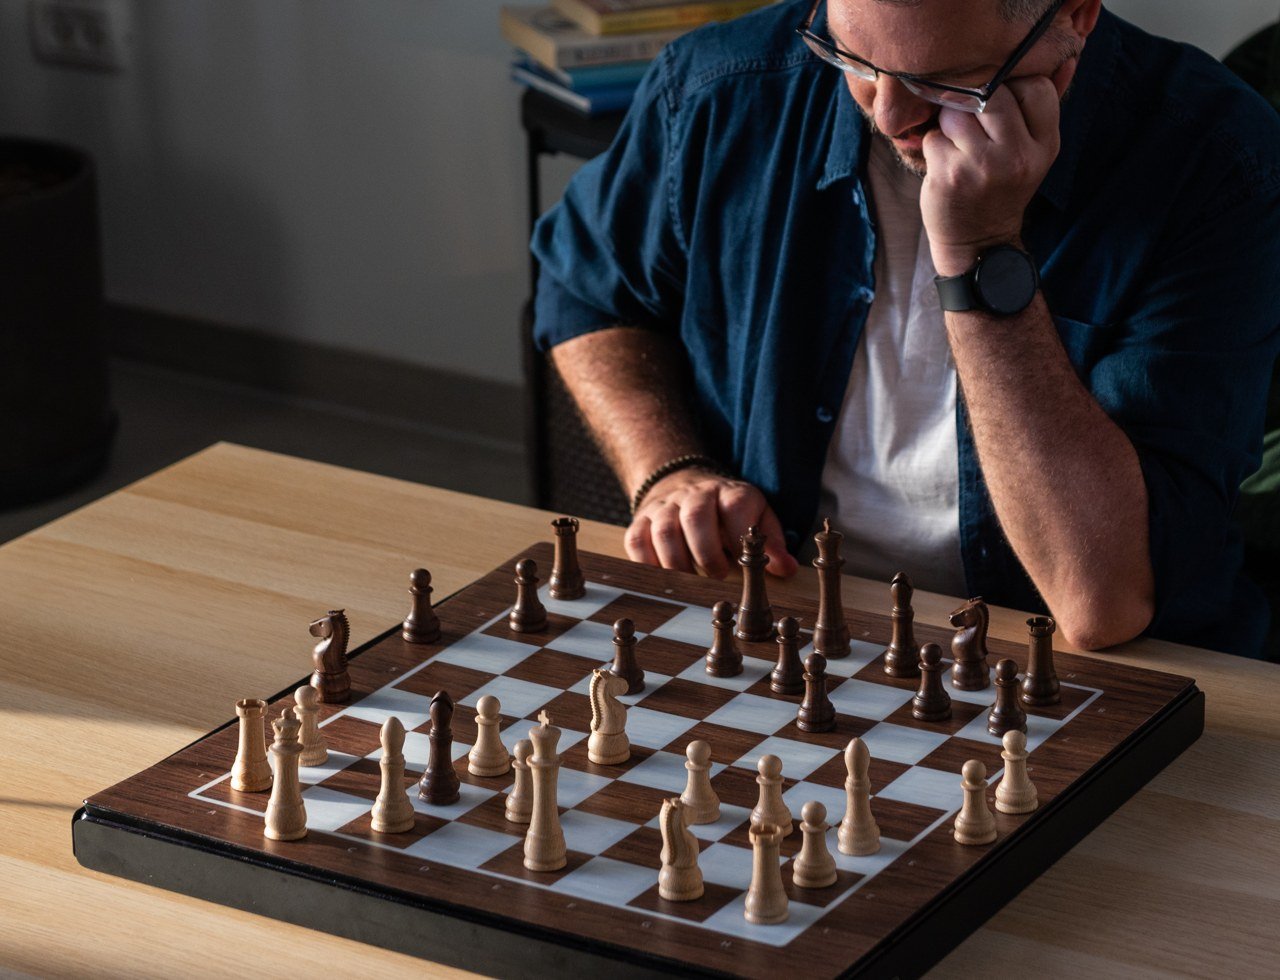 This special chessboard brings digital opponents into the physical world